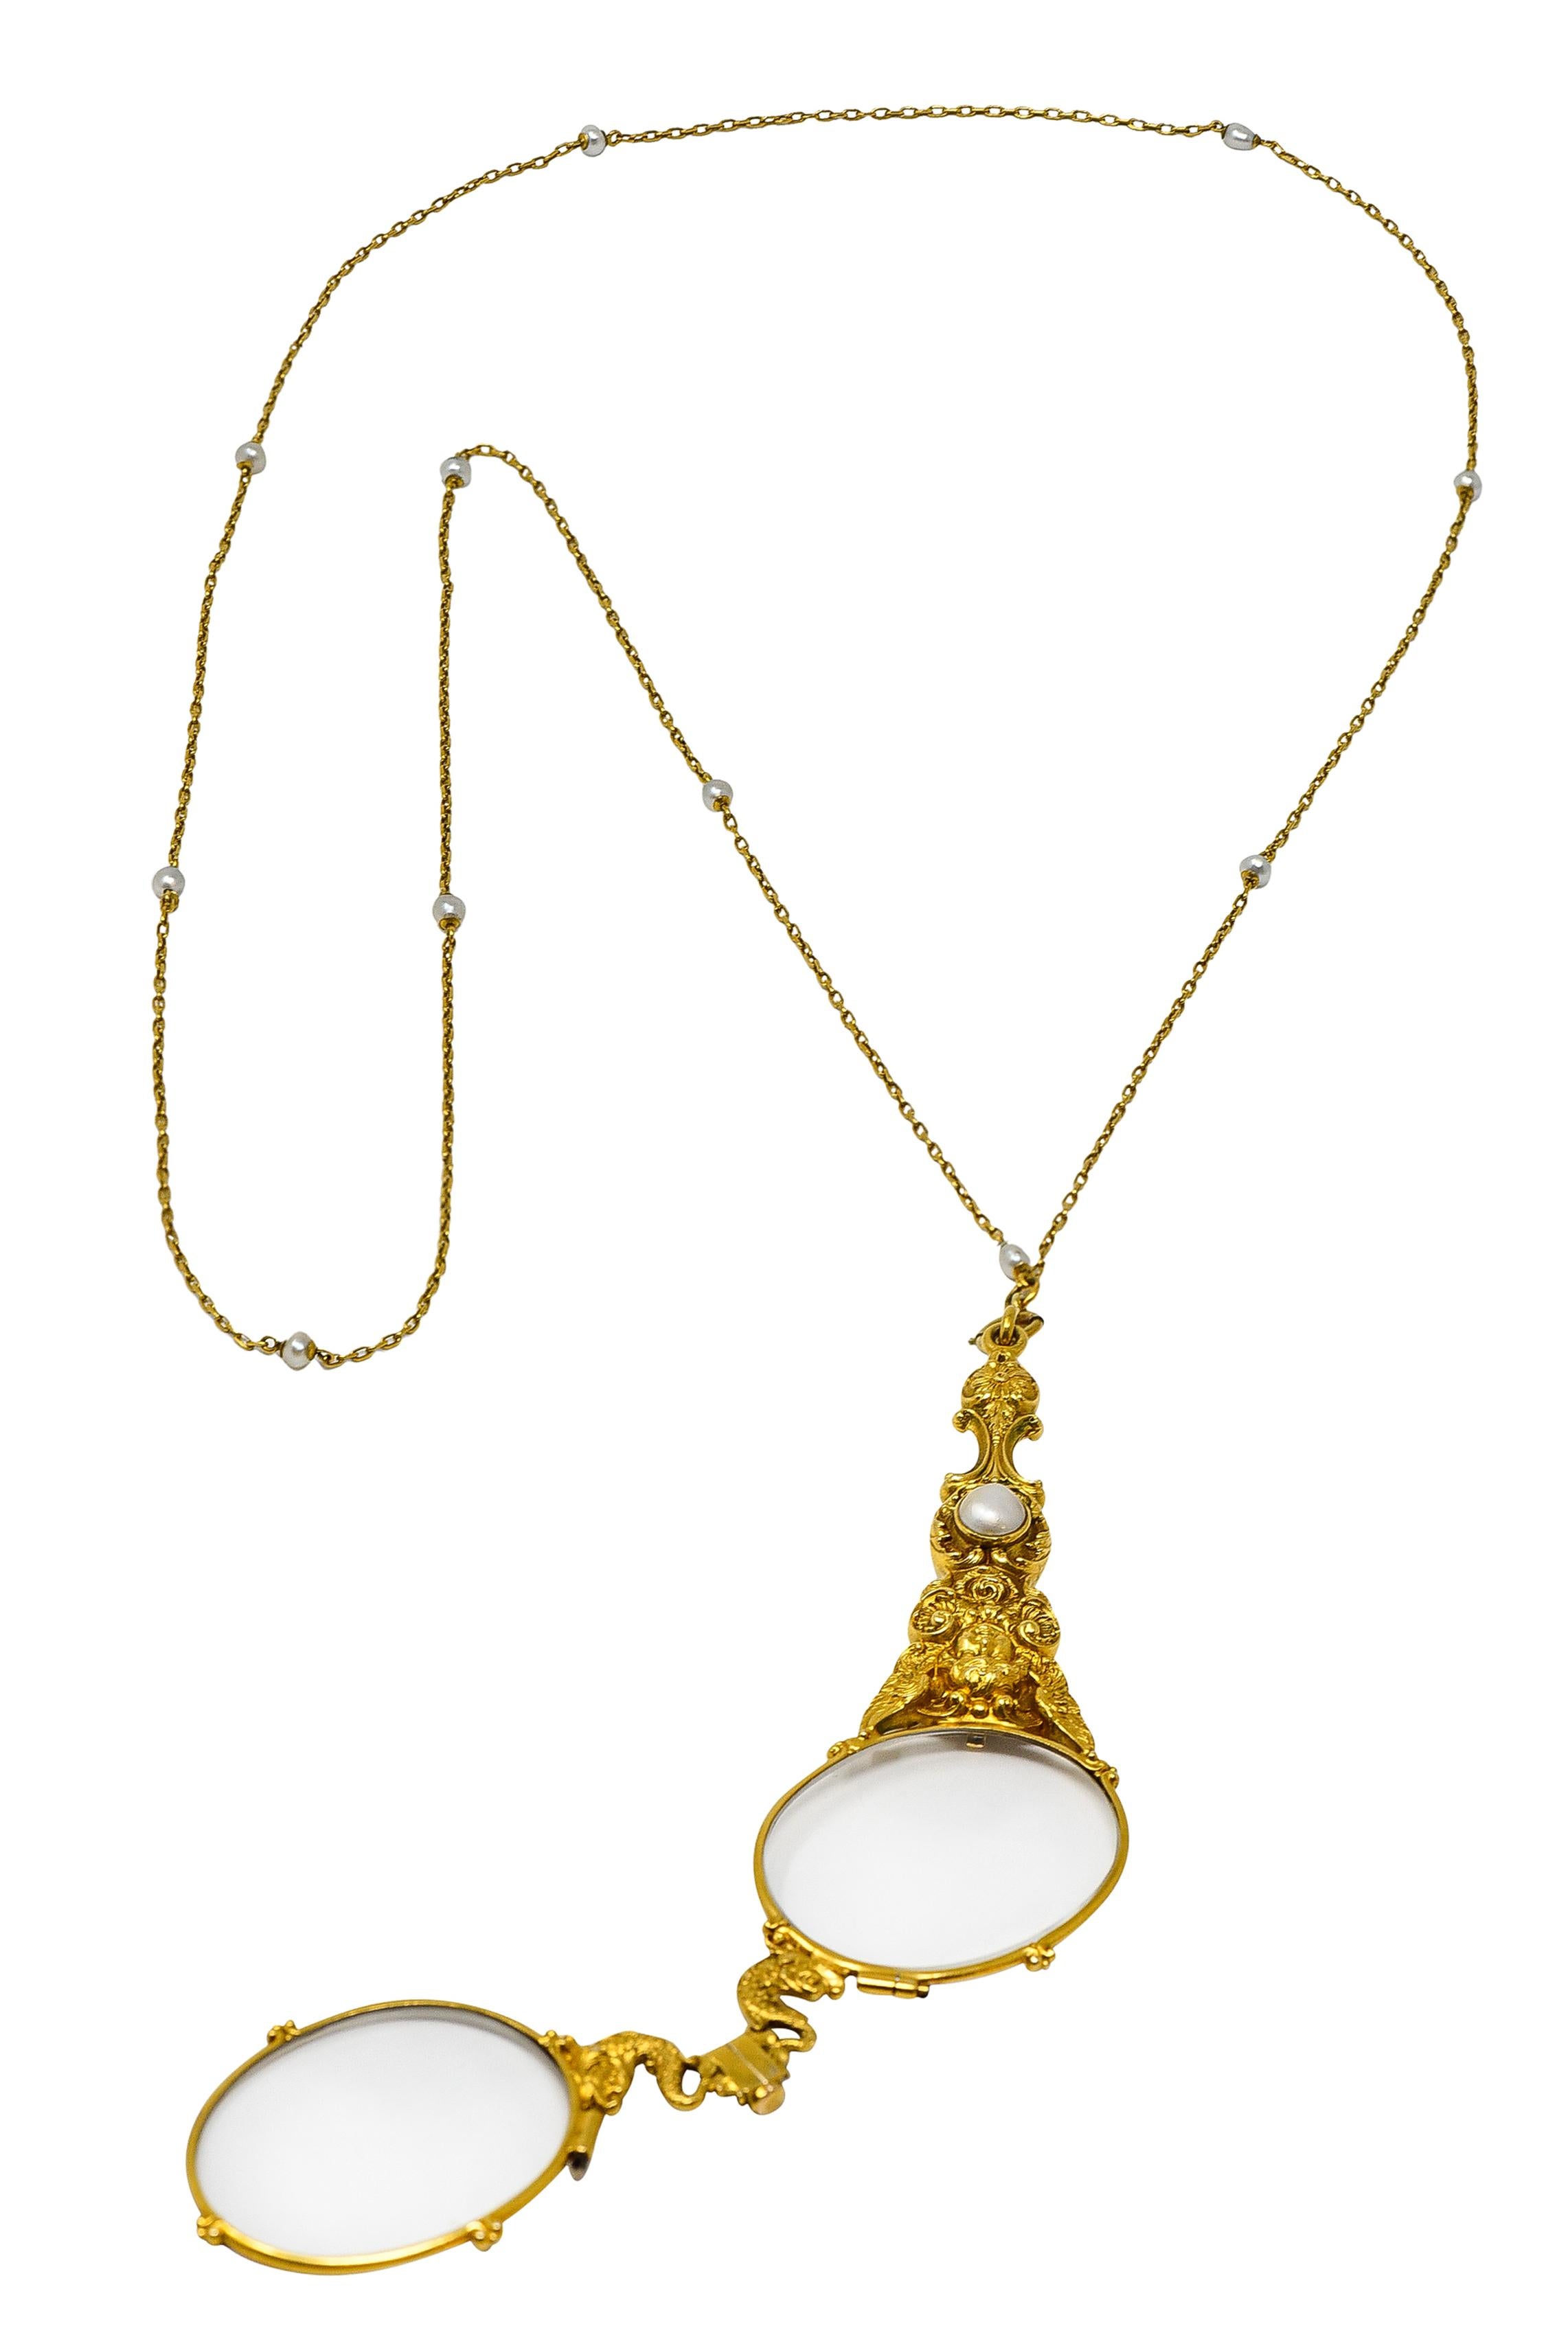 Long cable eternity chain necklace is intermittent with 3.0 mm pearl stations - white and iridescent. Suspending folded lorgnette glasses with a highly rendered handle. Depicting florals, cupids, and a cartouche centering a 6.5 mm mabe pearl. Cream